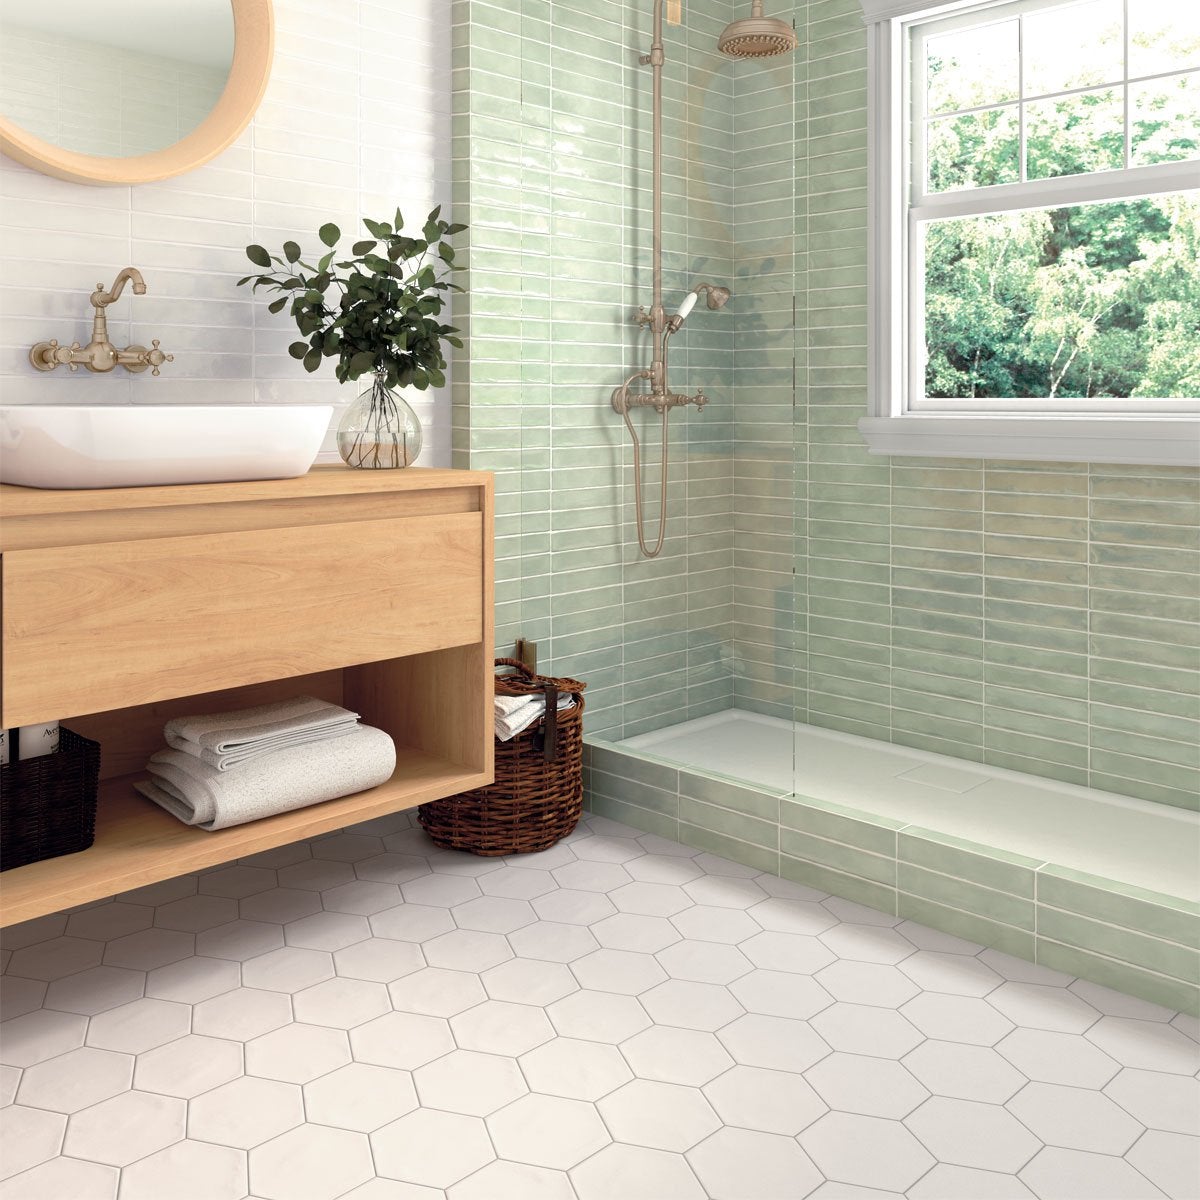 Exciting Tips For Using Tile Sizes To Your Advantage